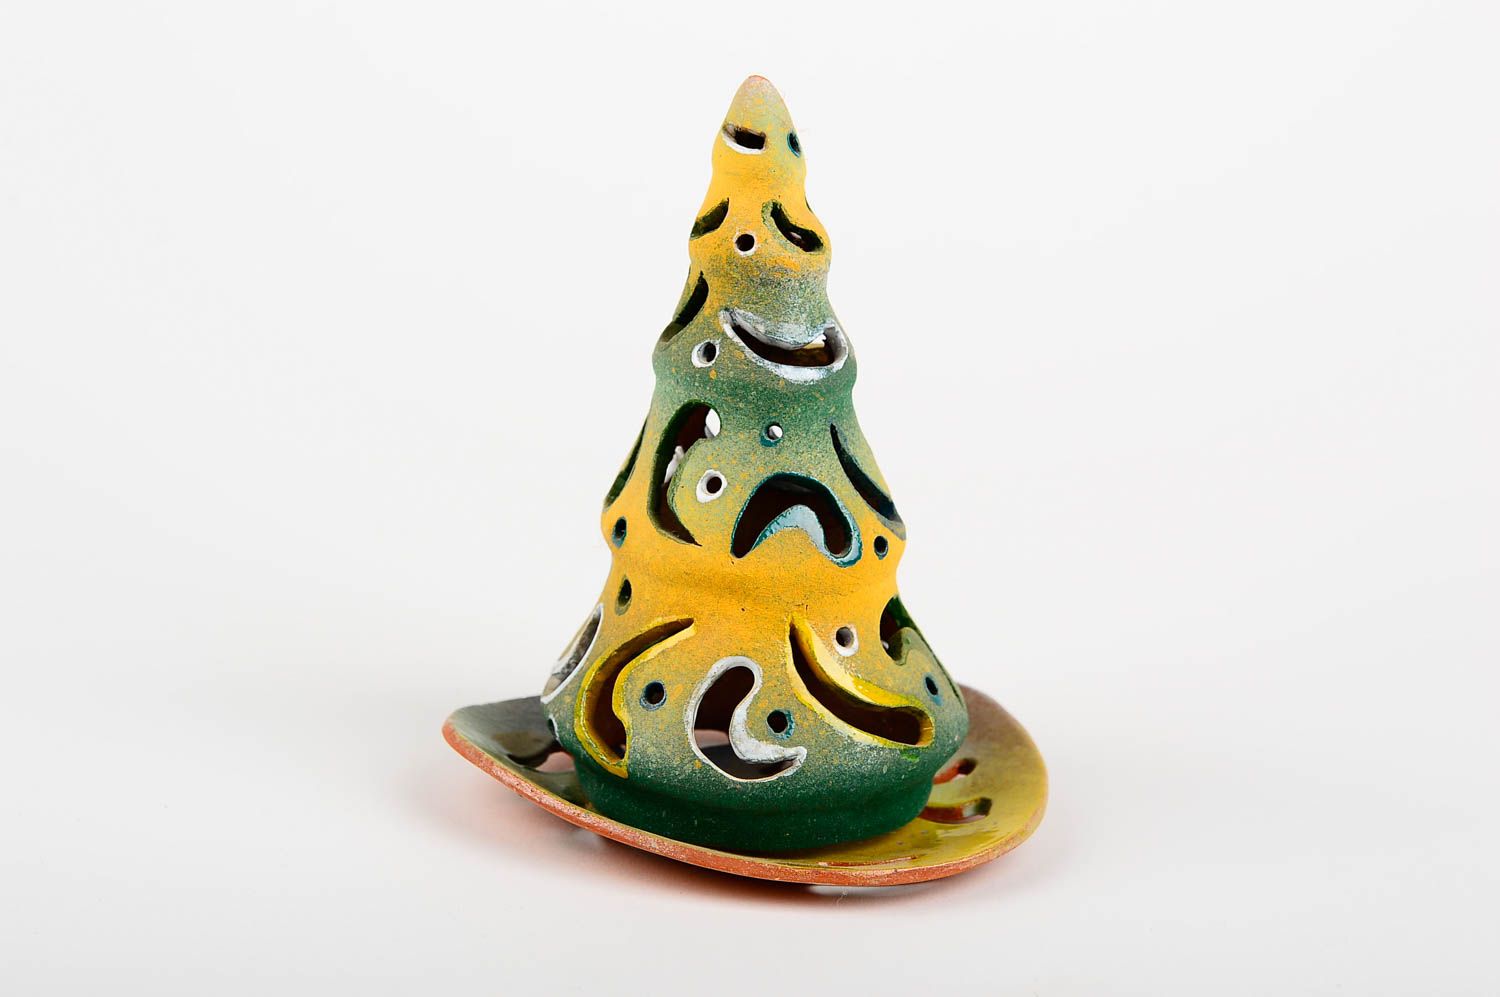 Tealight ceramic light-glow yellow Christmas tree candle holder 5,9 inches, 0,43 lb photo 1